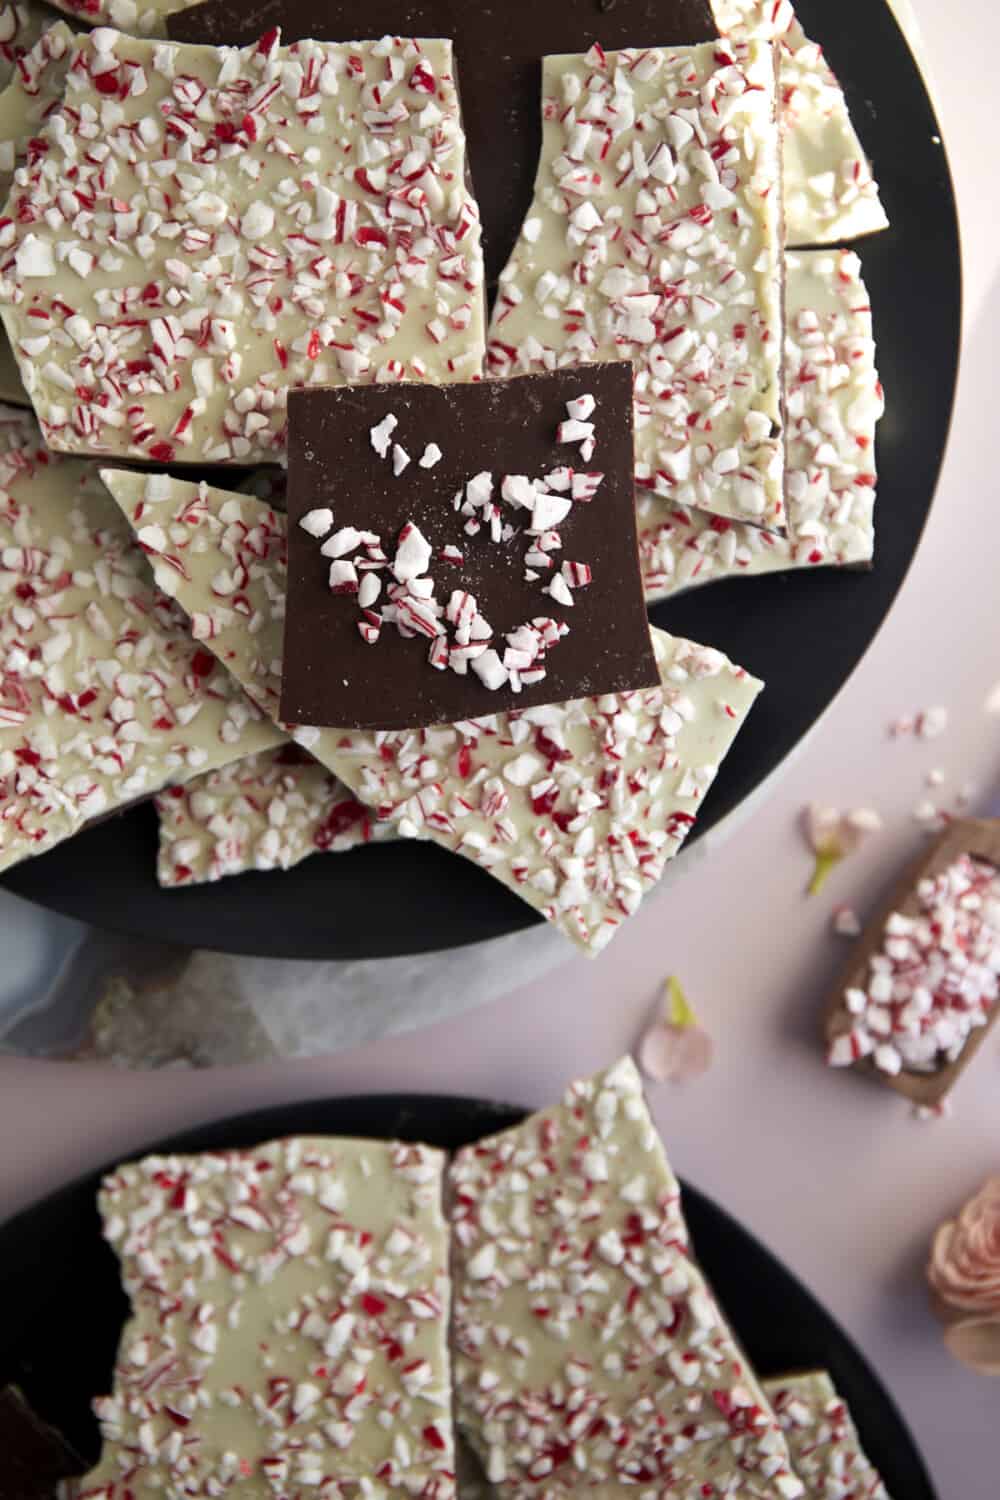 a plate full of chocolate peppermint bark